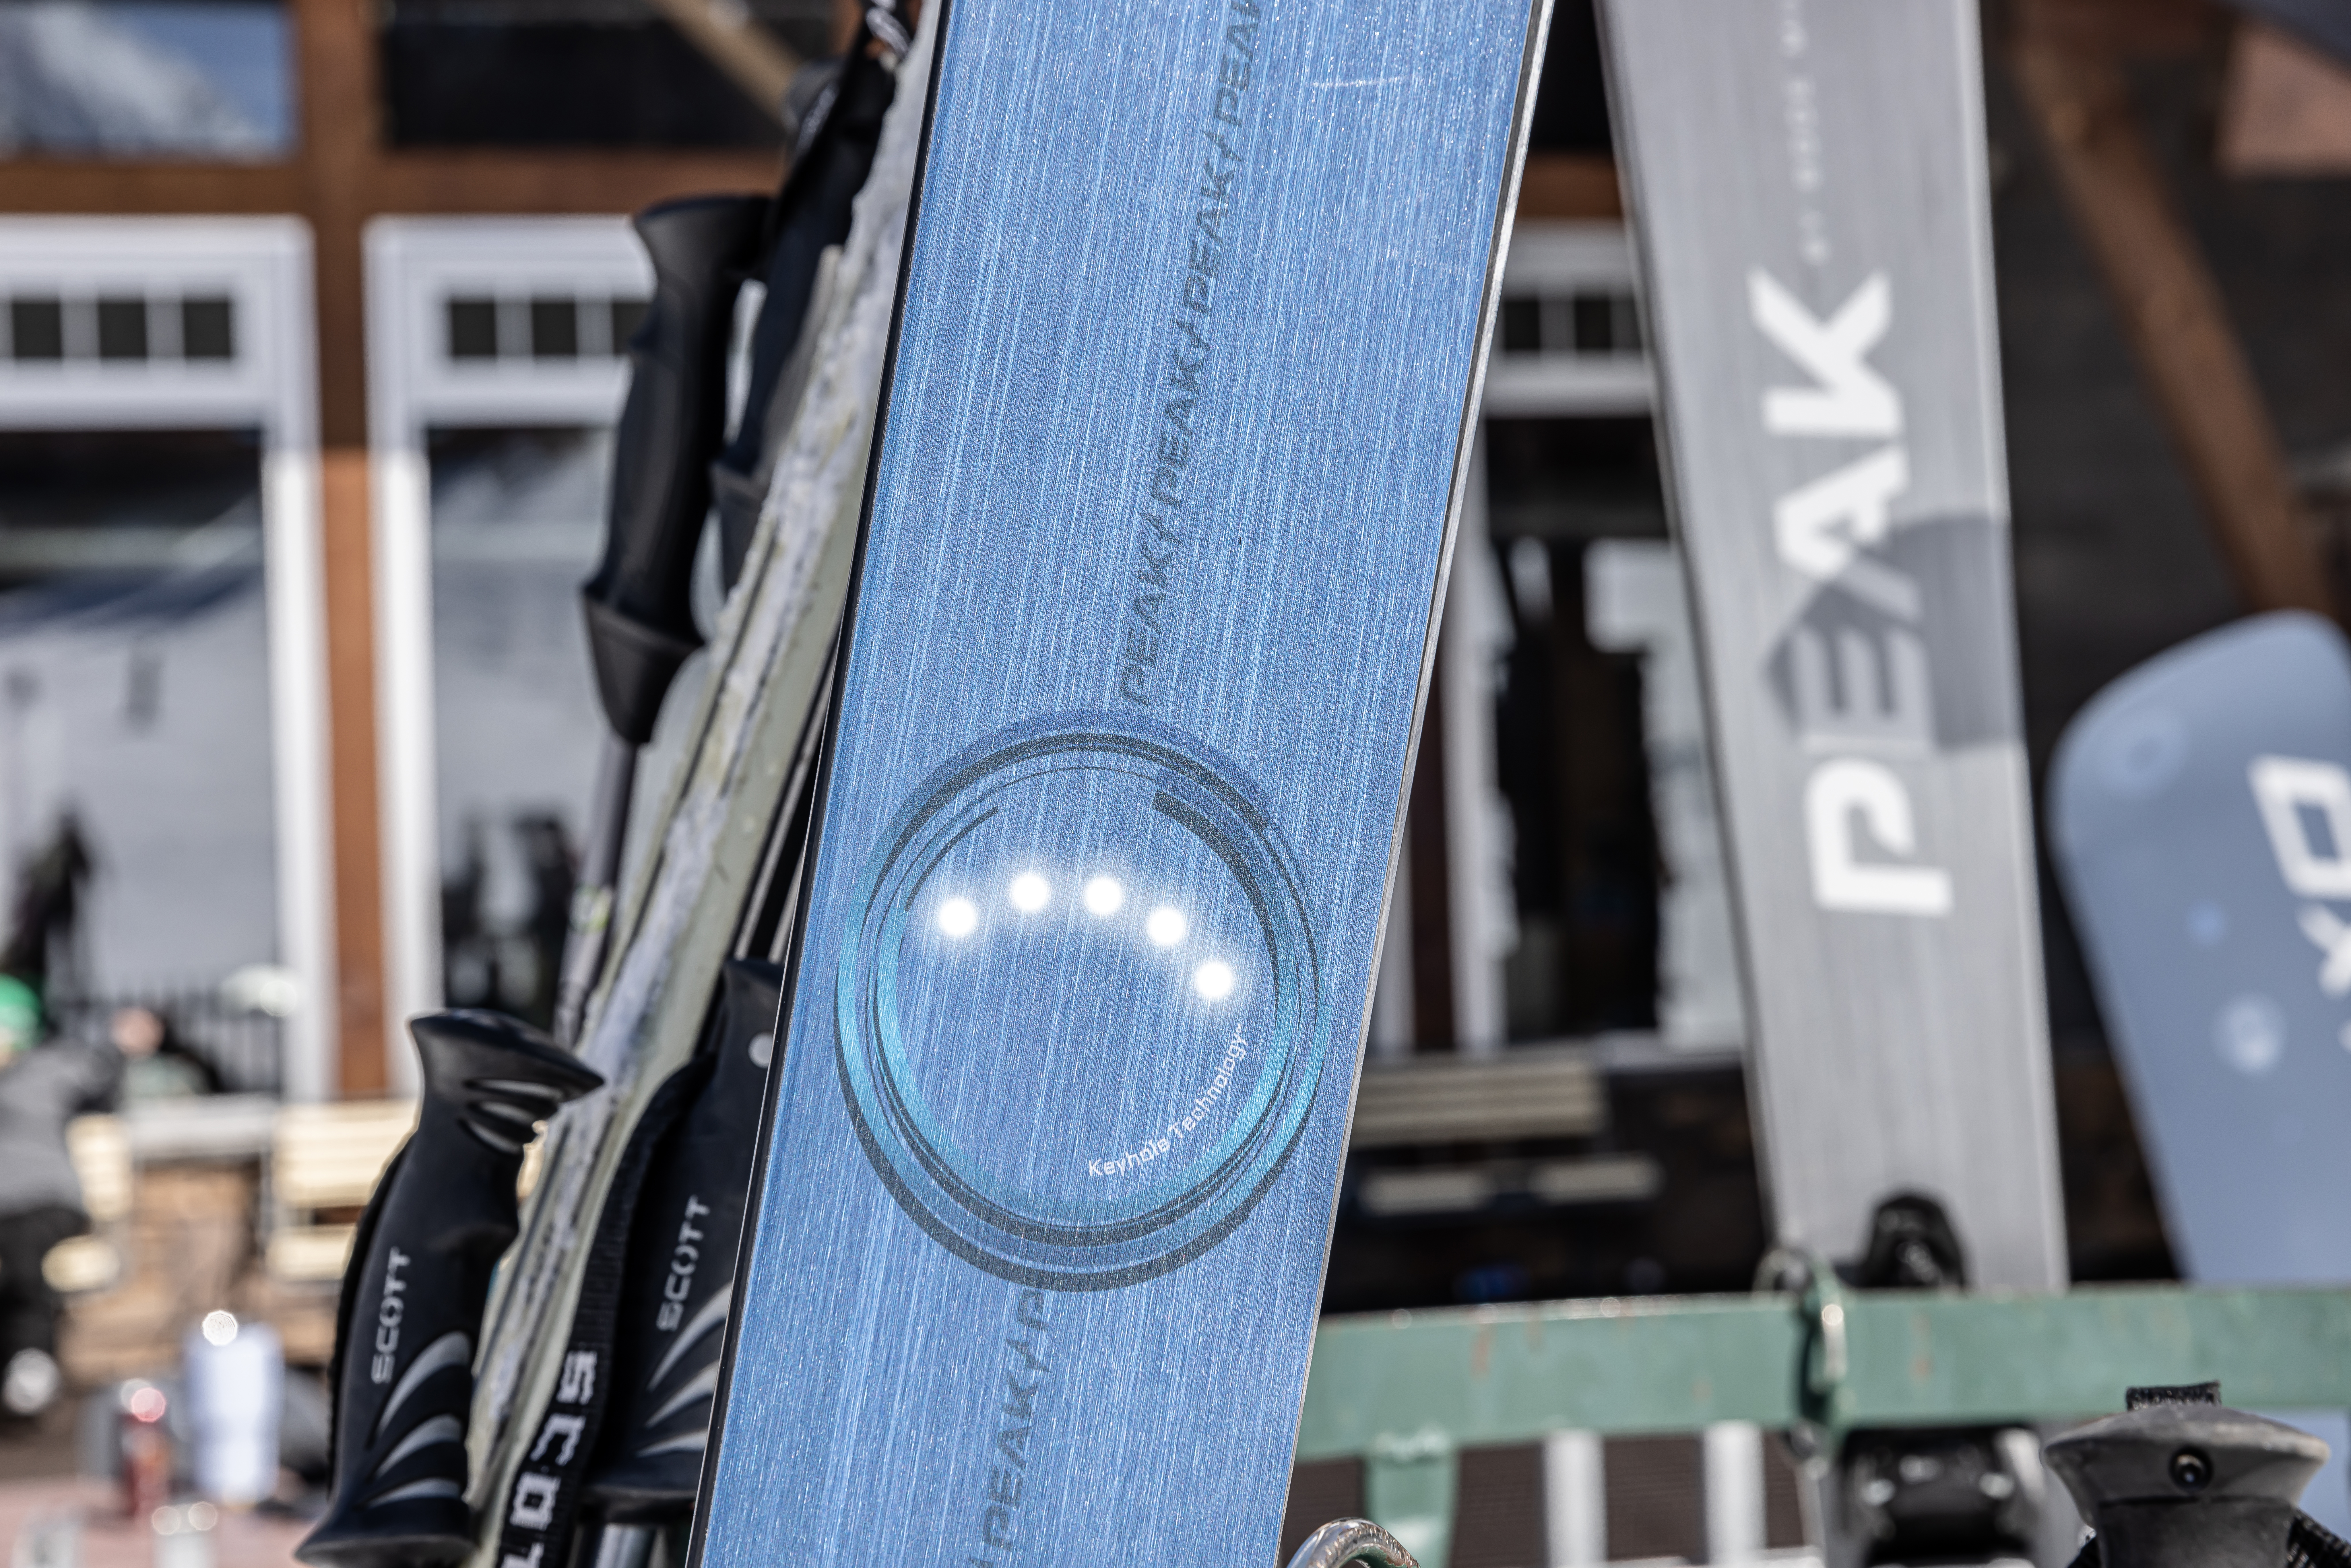 Never Lose Your Skis Again: Peak Ski Company to Include Built-In Tracking Technology